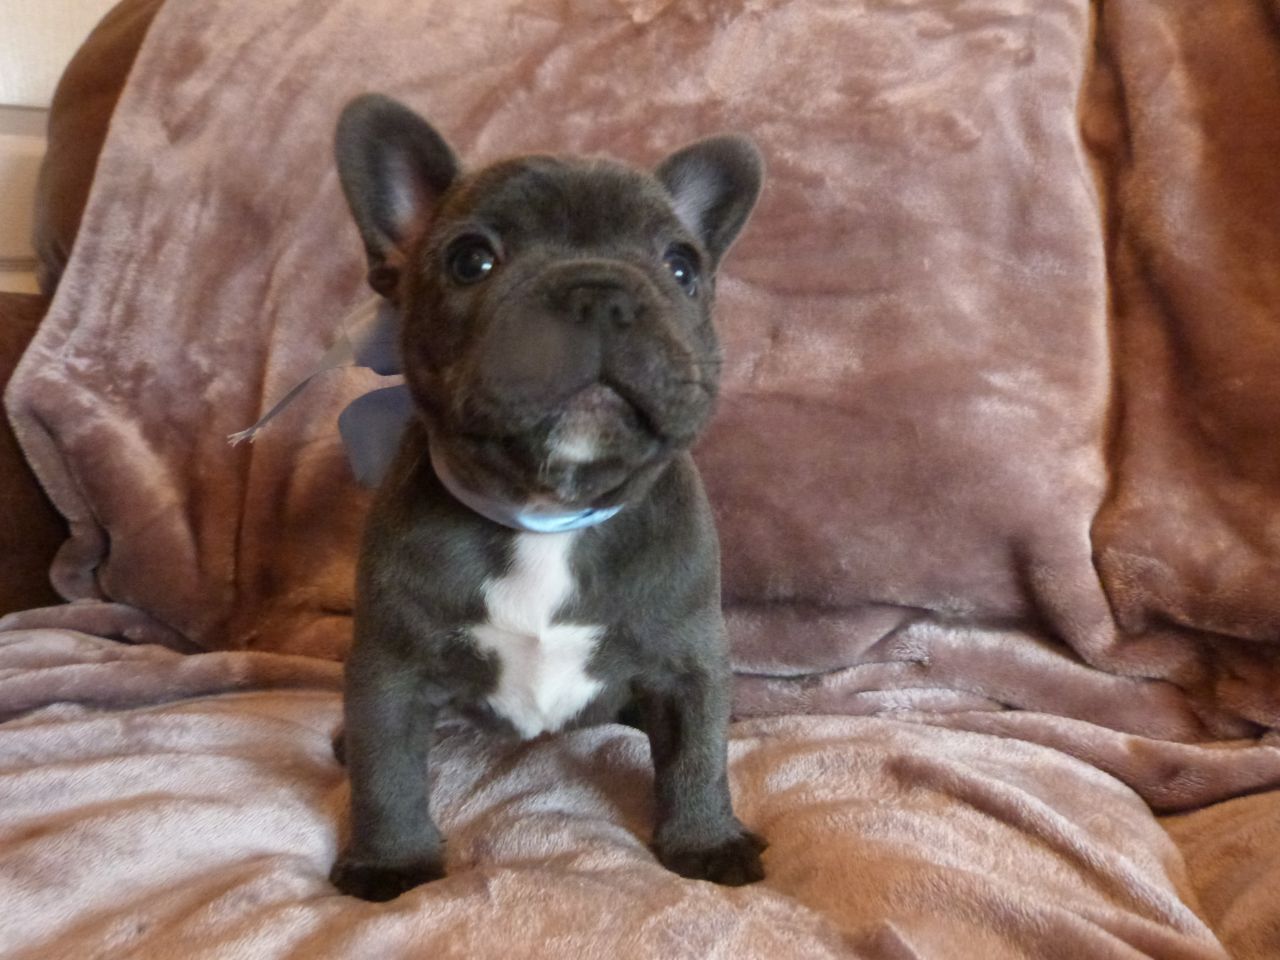 ++STUNNING FRENCH BULLDOG PUPPIES FOR SALE++